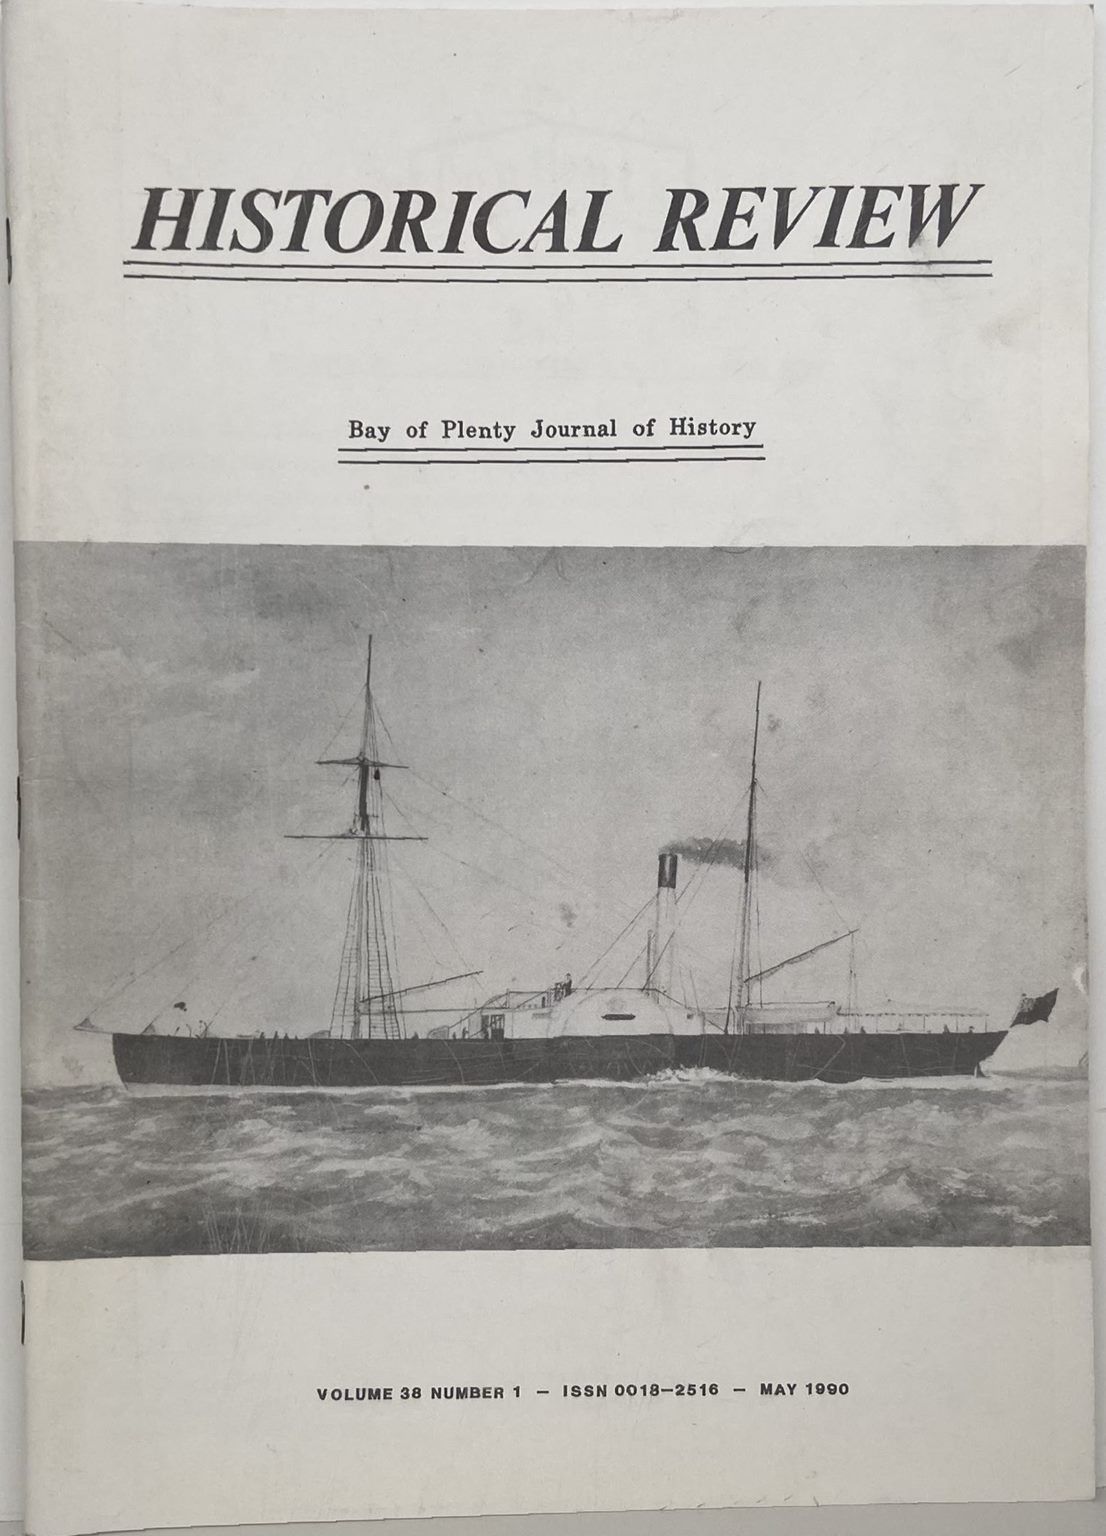 HISTORICAL REVIEW: Bay of Plenty Journal of History - Volume 38, Number 1